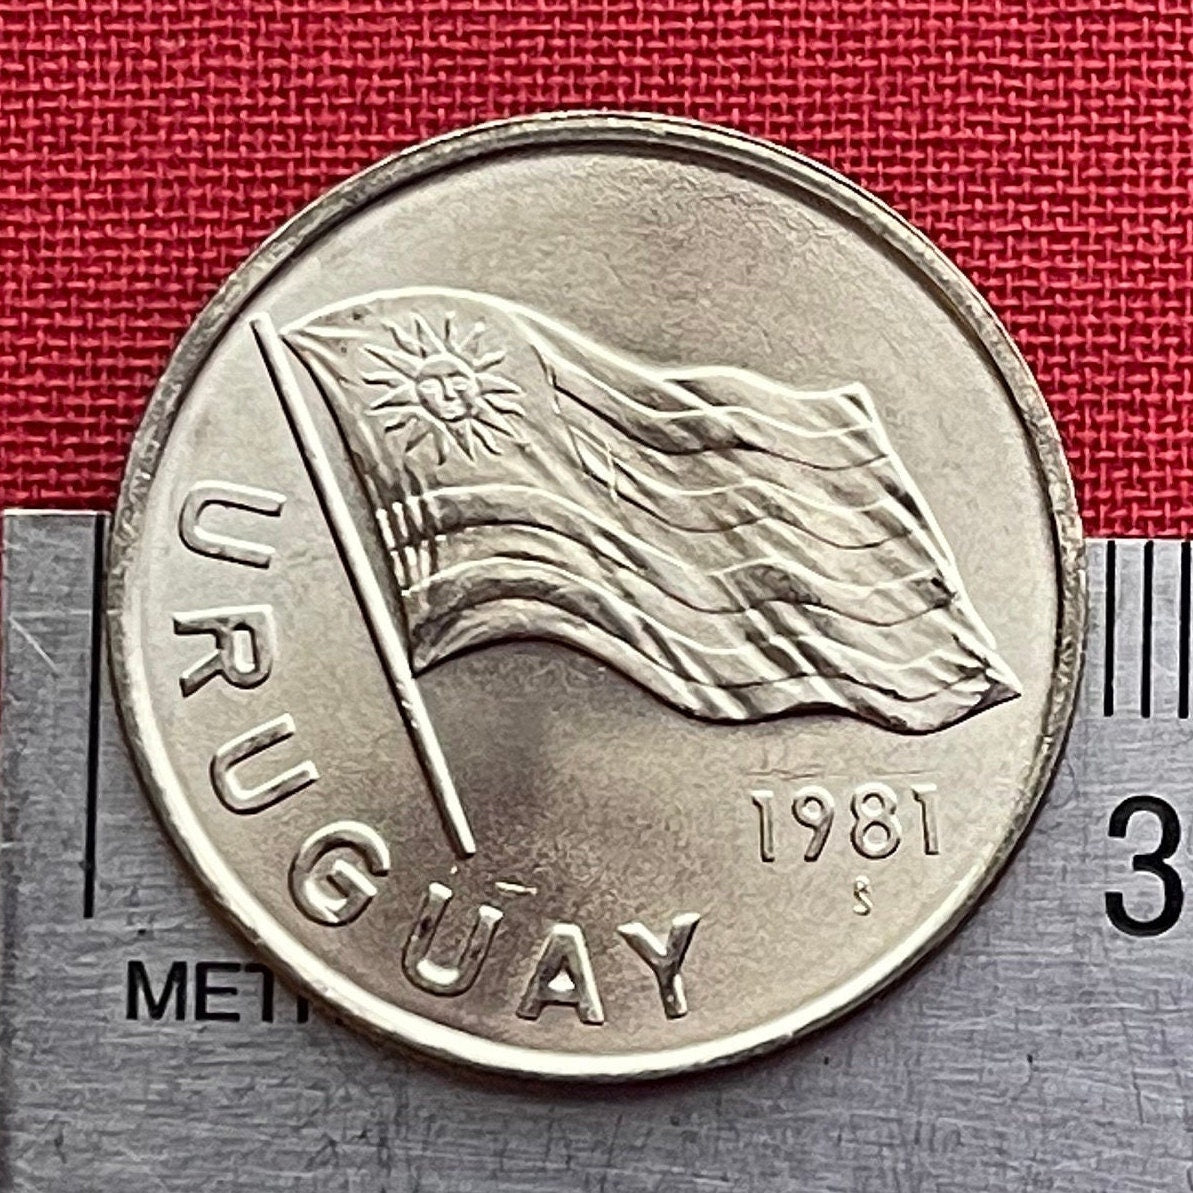 Flag Waving & Cockspur Coral Flower 5 New Pesos Uruguay Authentic Coin Money for Jewelry (Sun of May) (Inca Sun God) (Sol Invictus)